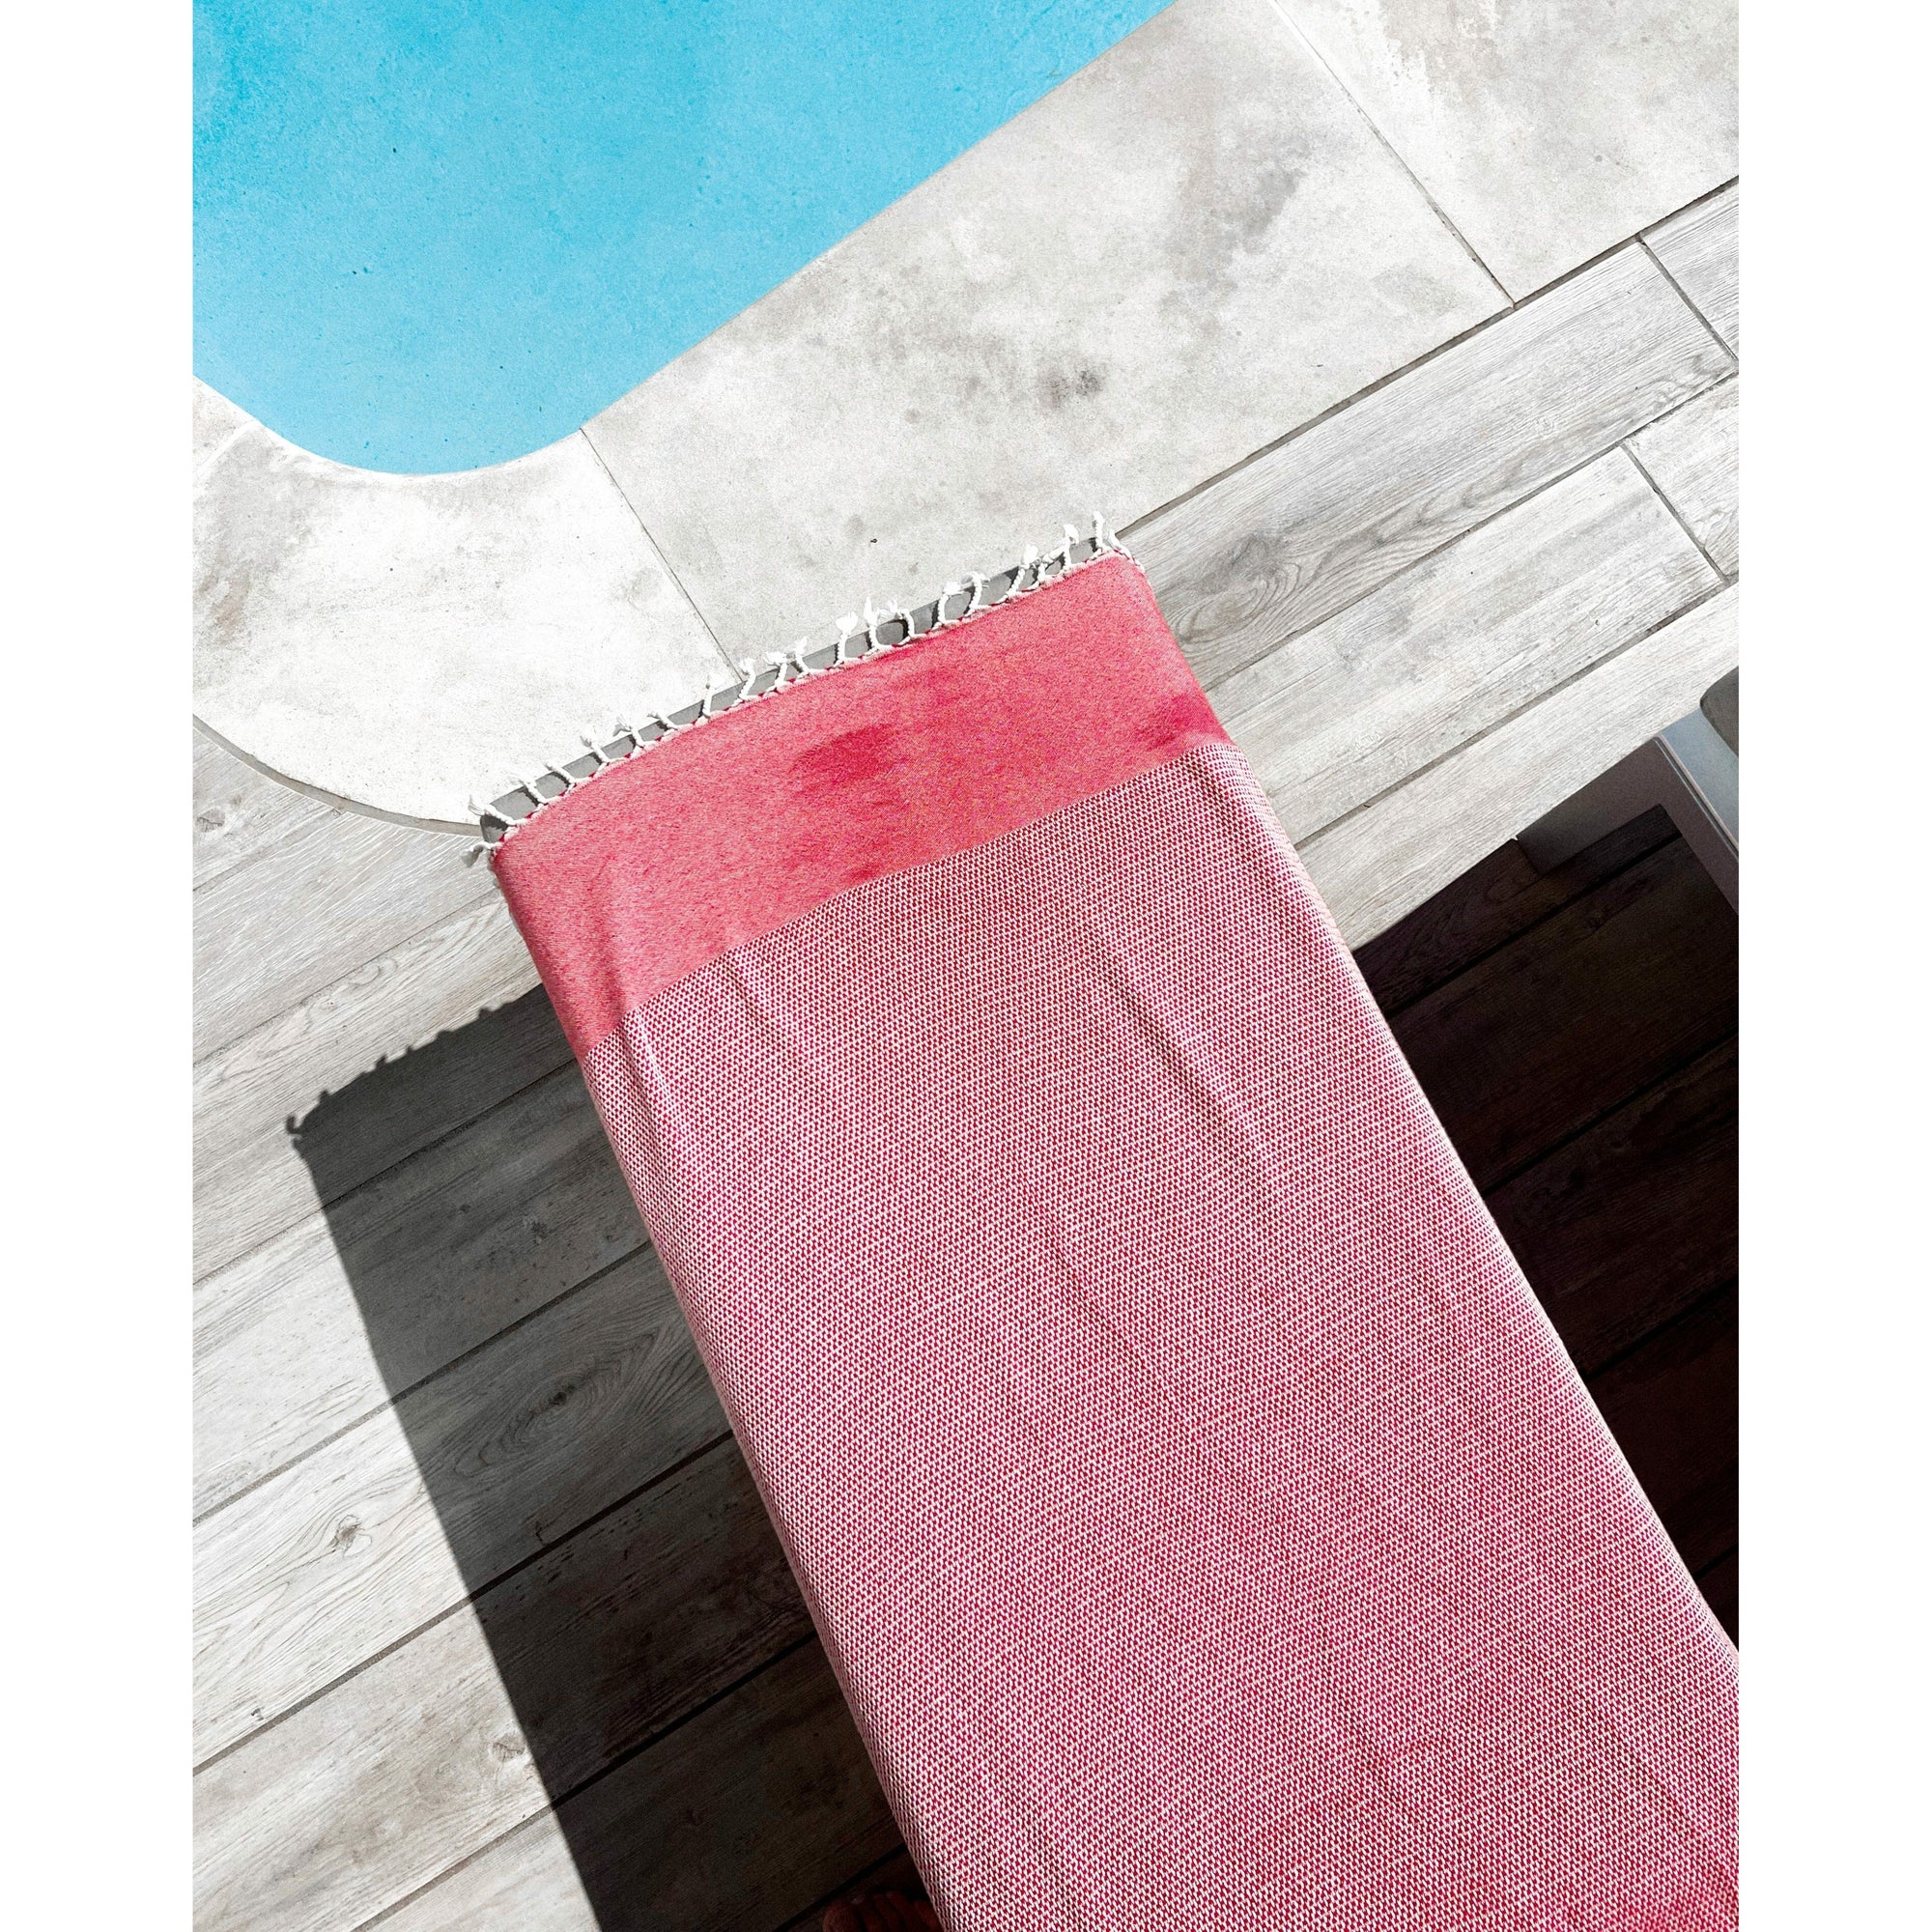 Sunkissed Red / L • 100cm x 180cm • 40"W x 72"L Montenegro • Sand Free Beach Towel by Sunkissed